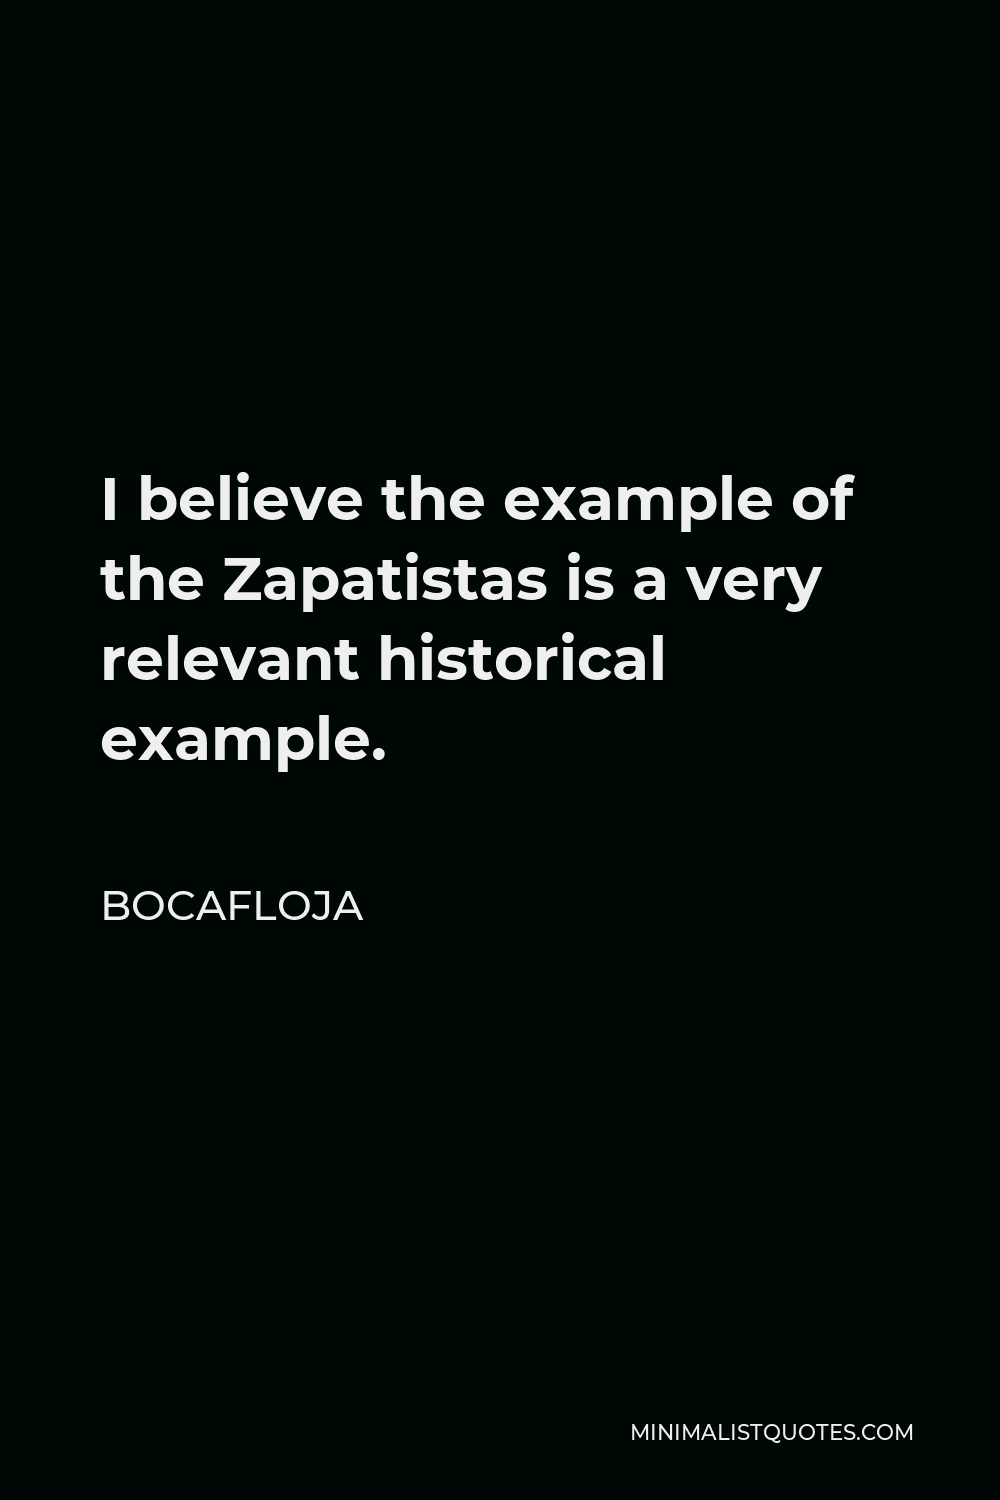 Bocafloja Quote - I believe the example of the Zapatistas is a very relevant historical example.